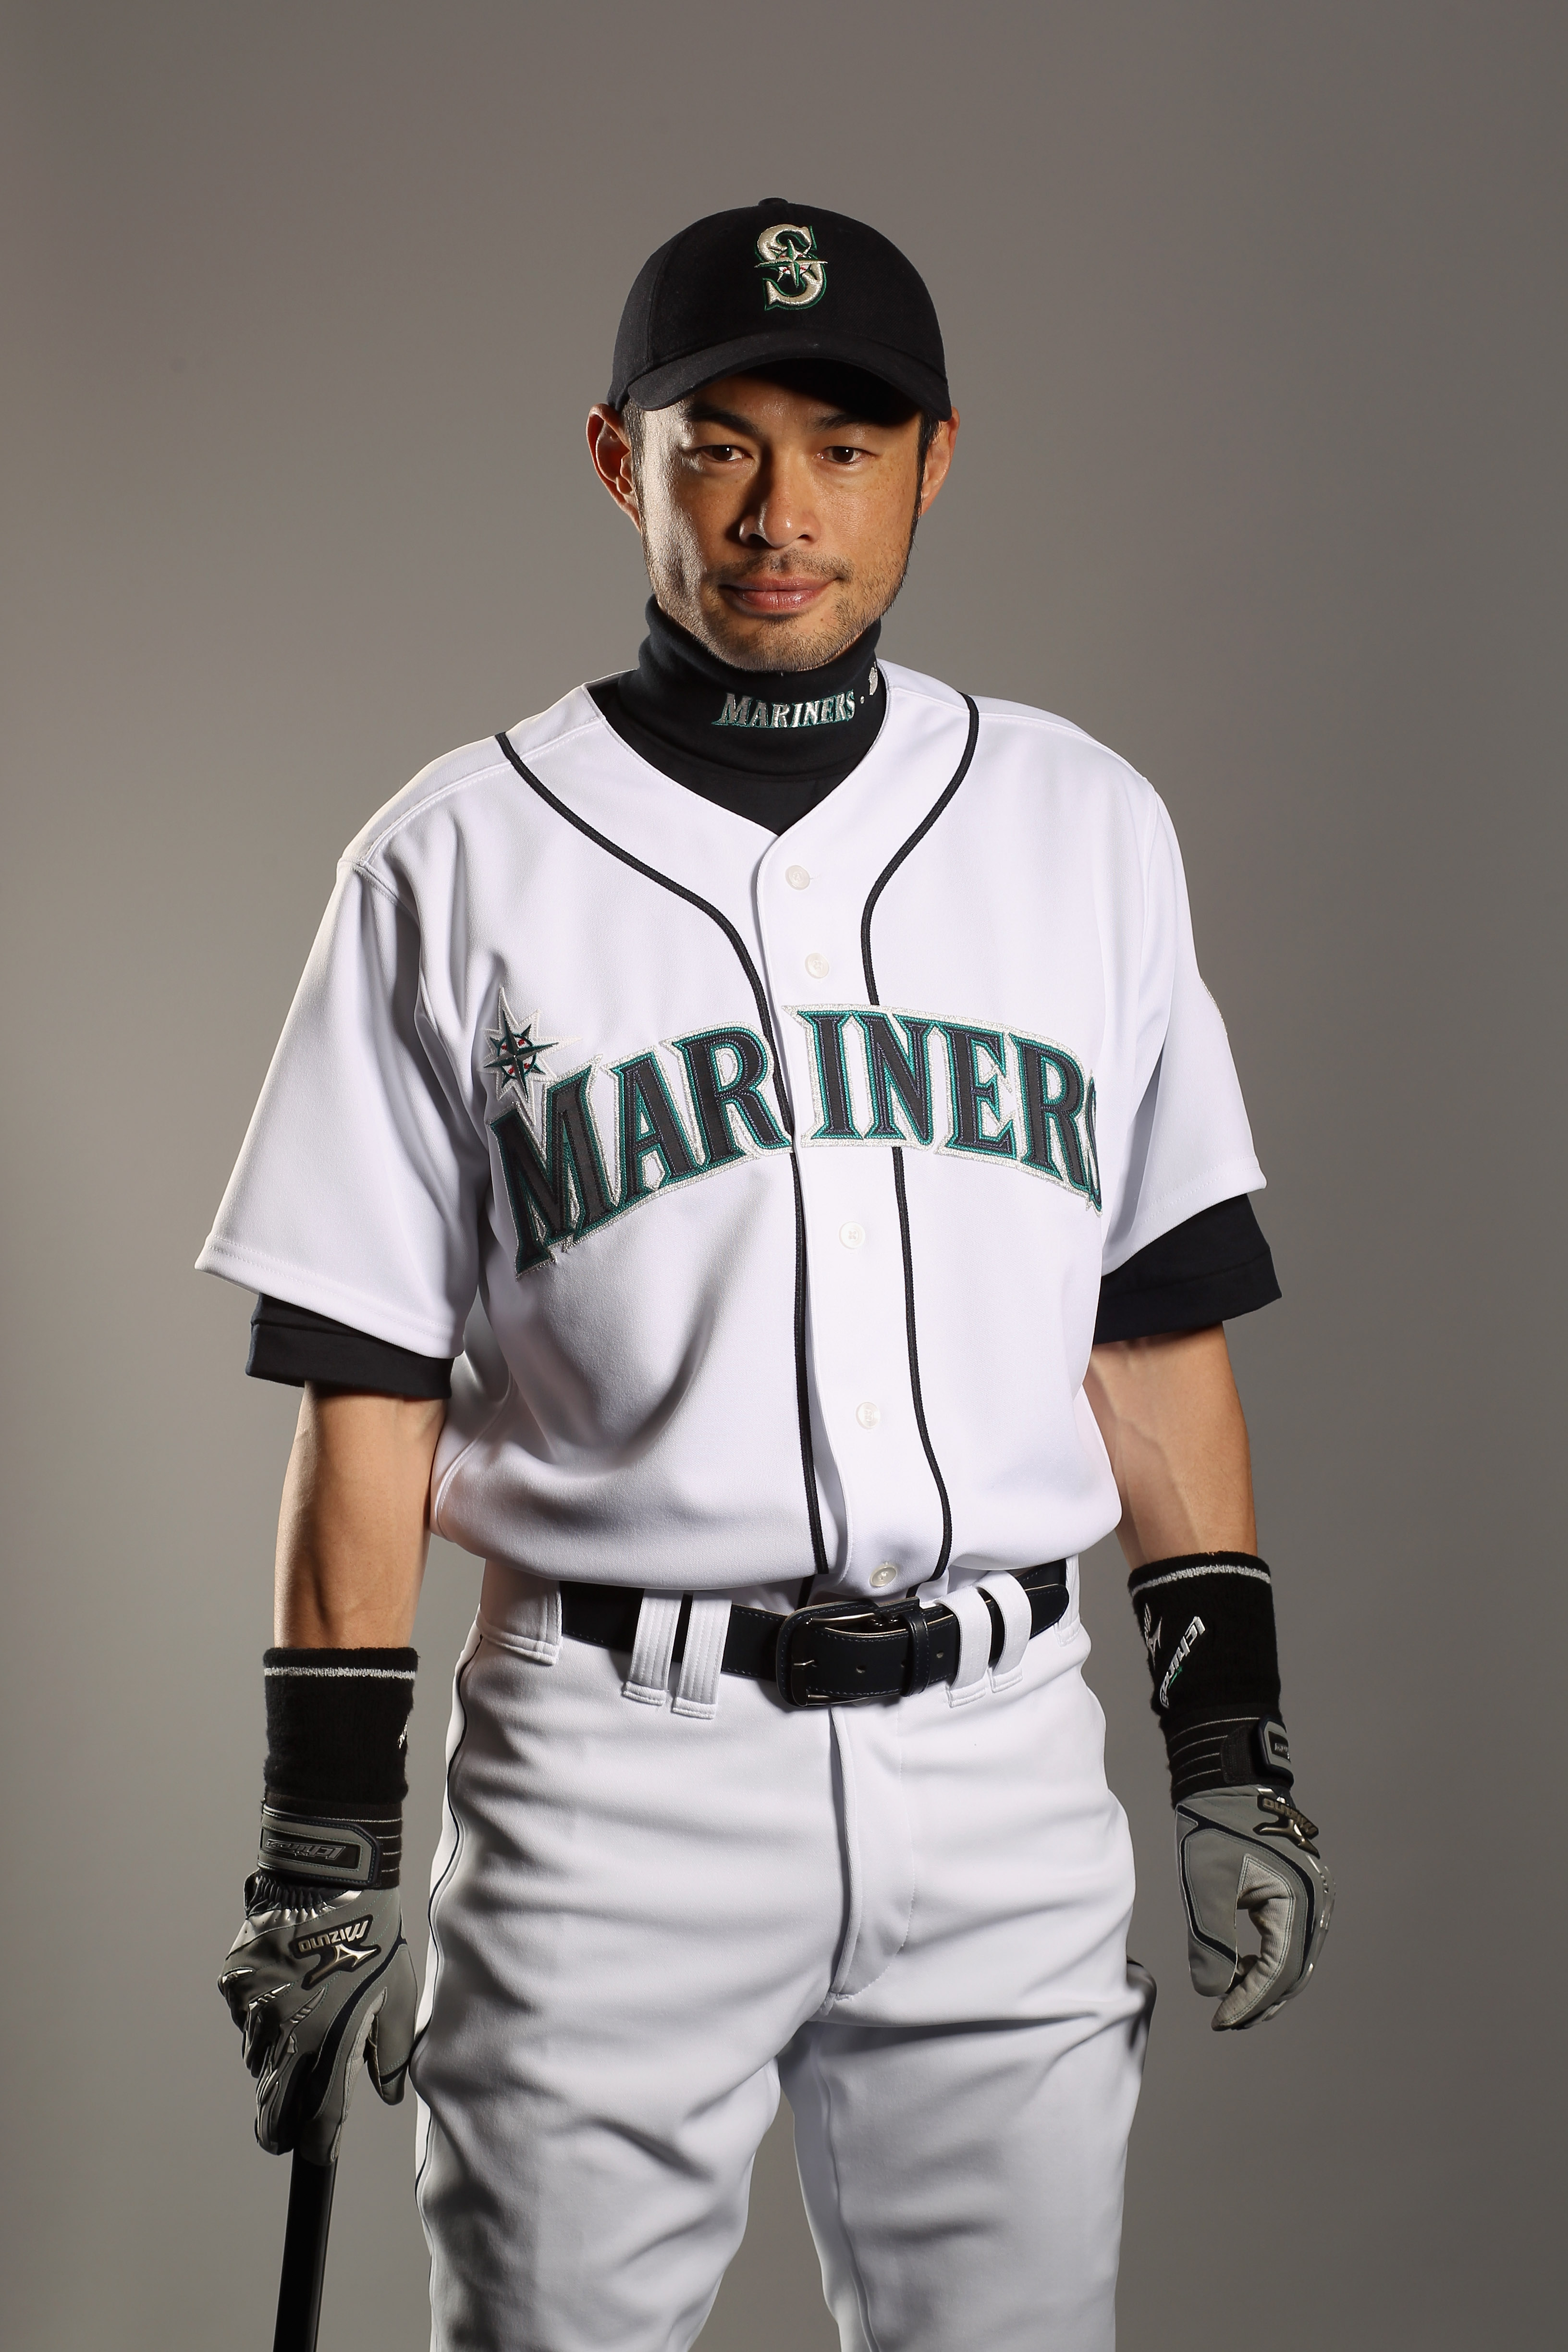 PEORIA, AZ - FEBRUARY 20:  Ichiro Suzuki #51 of the Seattle Mariners poses for a portrait at the Peoria Sports Complex on February 20, 2011 in Peoria, Arizona.  (Photo by Ezra Shaw/Getty Images)